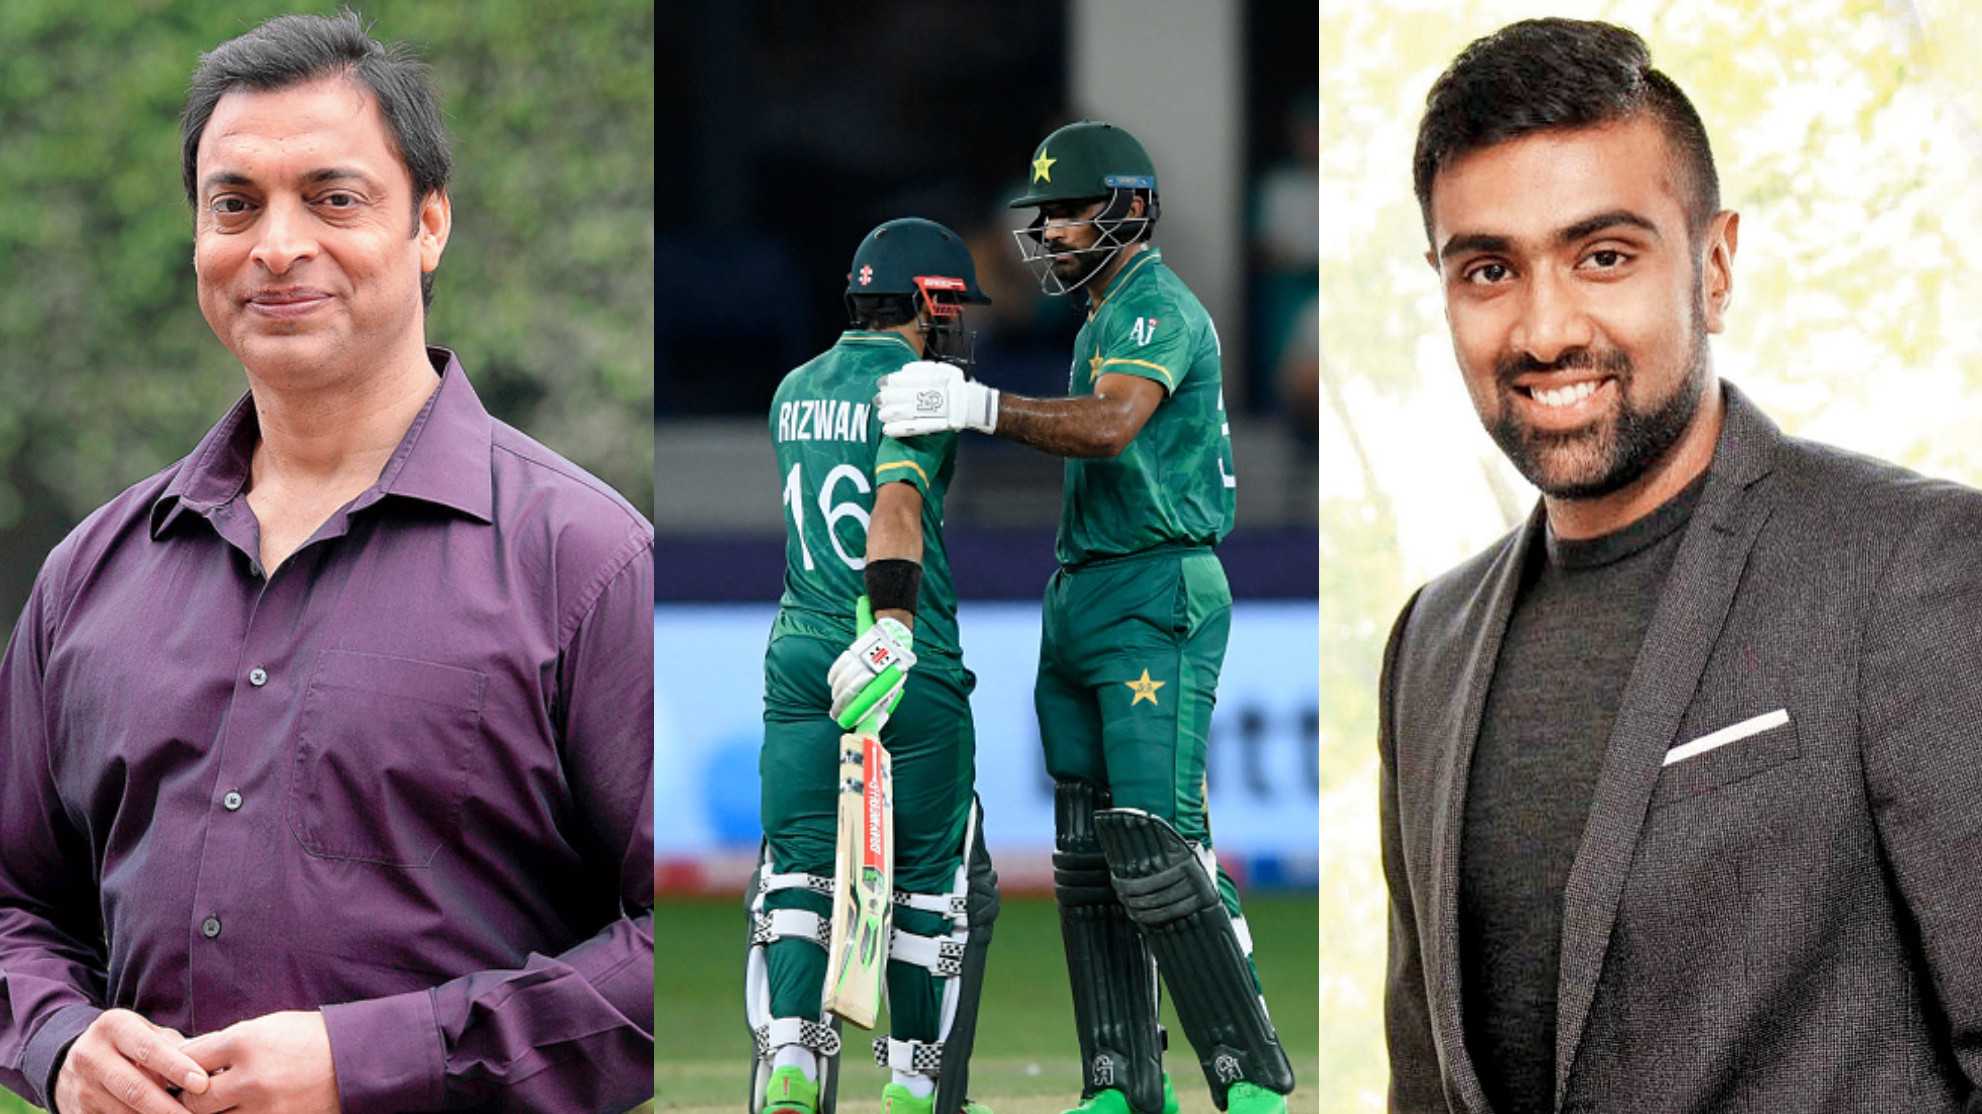 T20 World Cup 2021: Cricket fraternity lauds Rizwan, Fakhar fifties as Pakistan posts 176/4 v Australia in 2nd semi-final